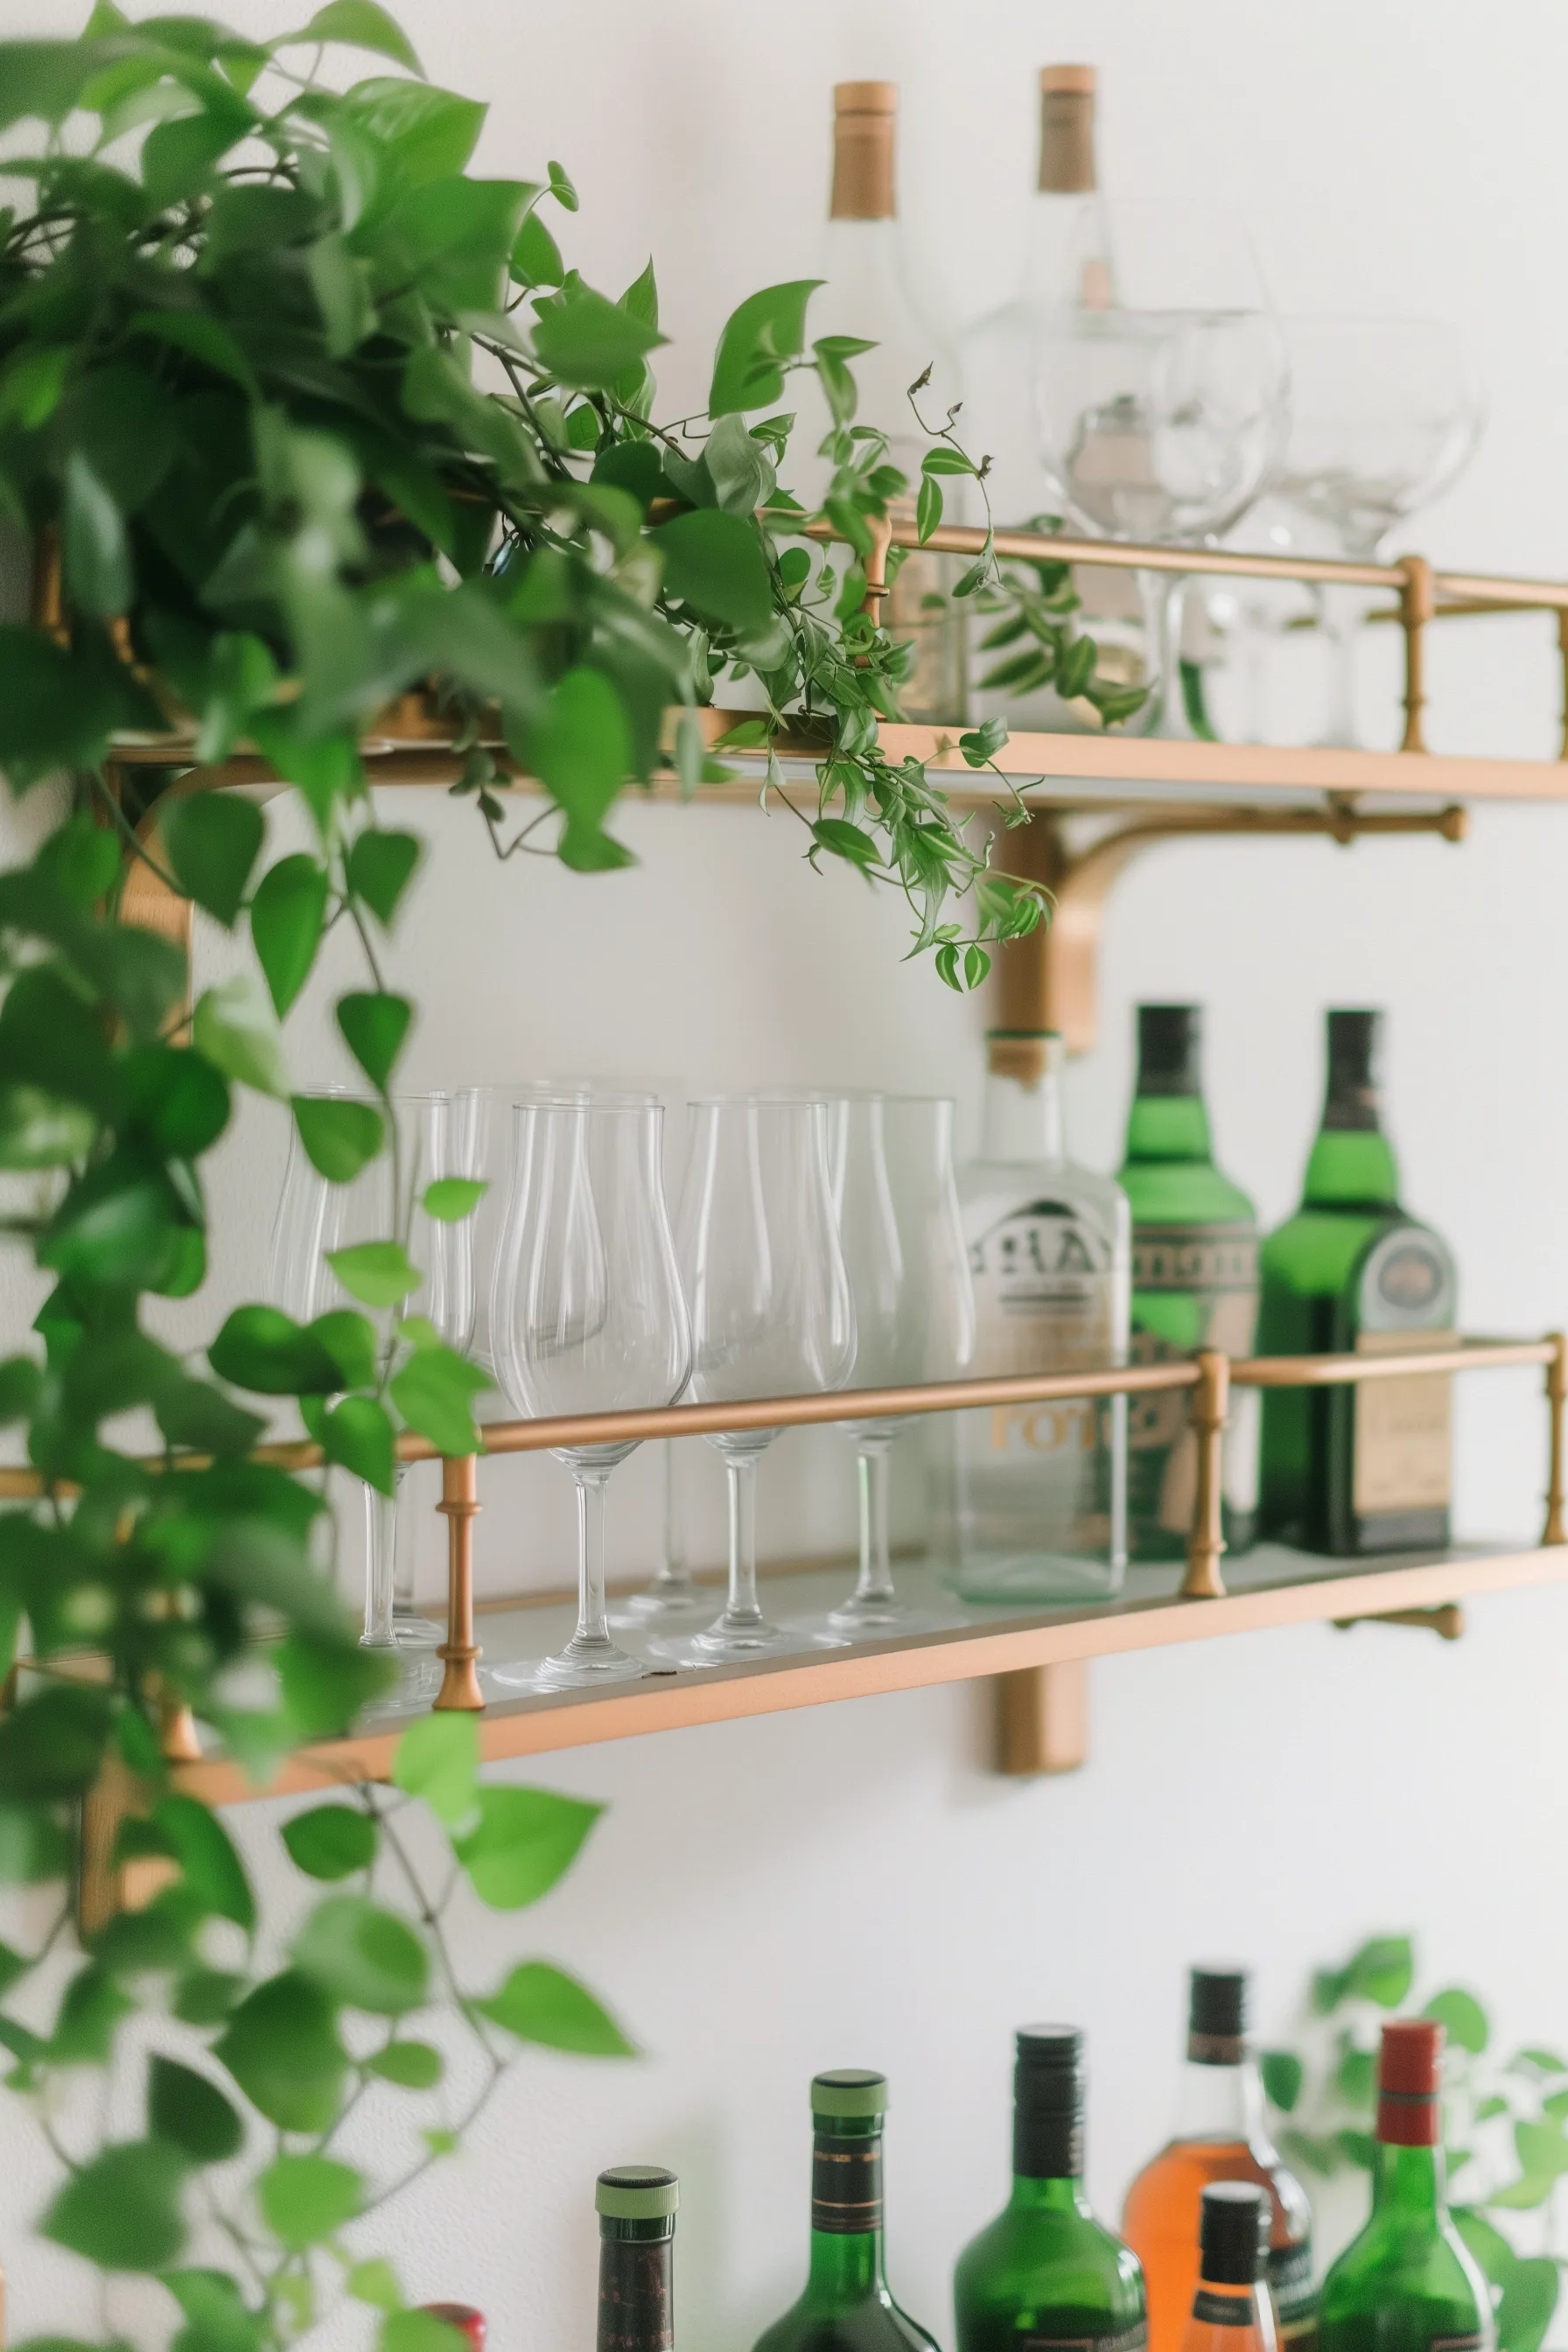 A DIY bar shelf gold accents and plants